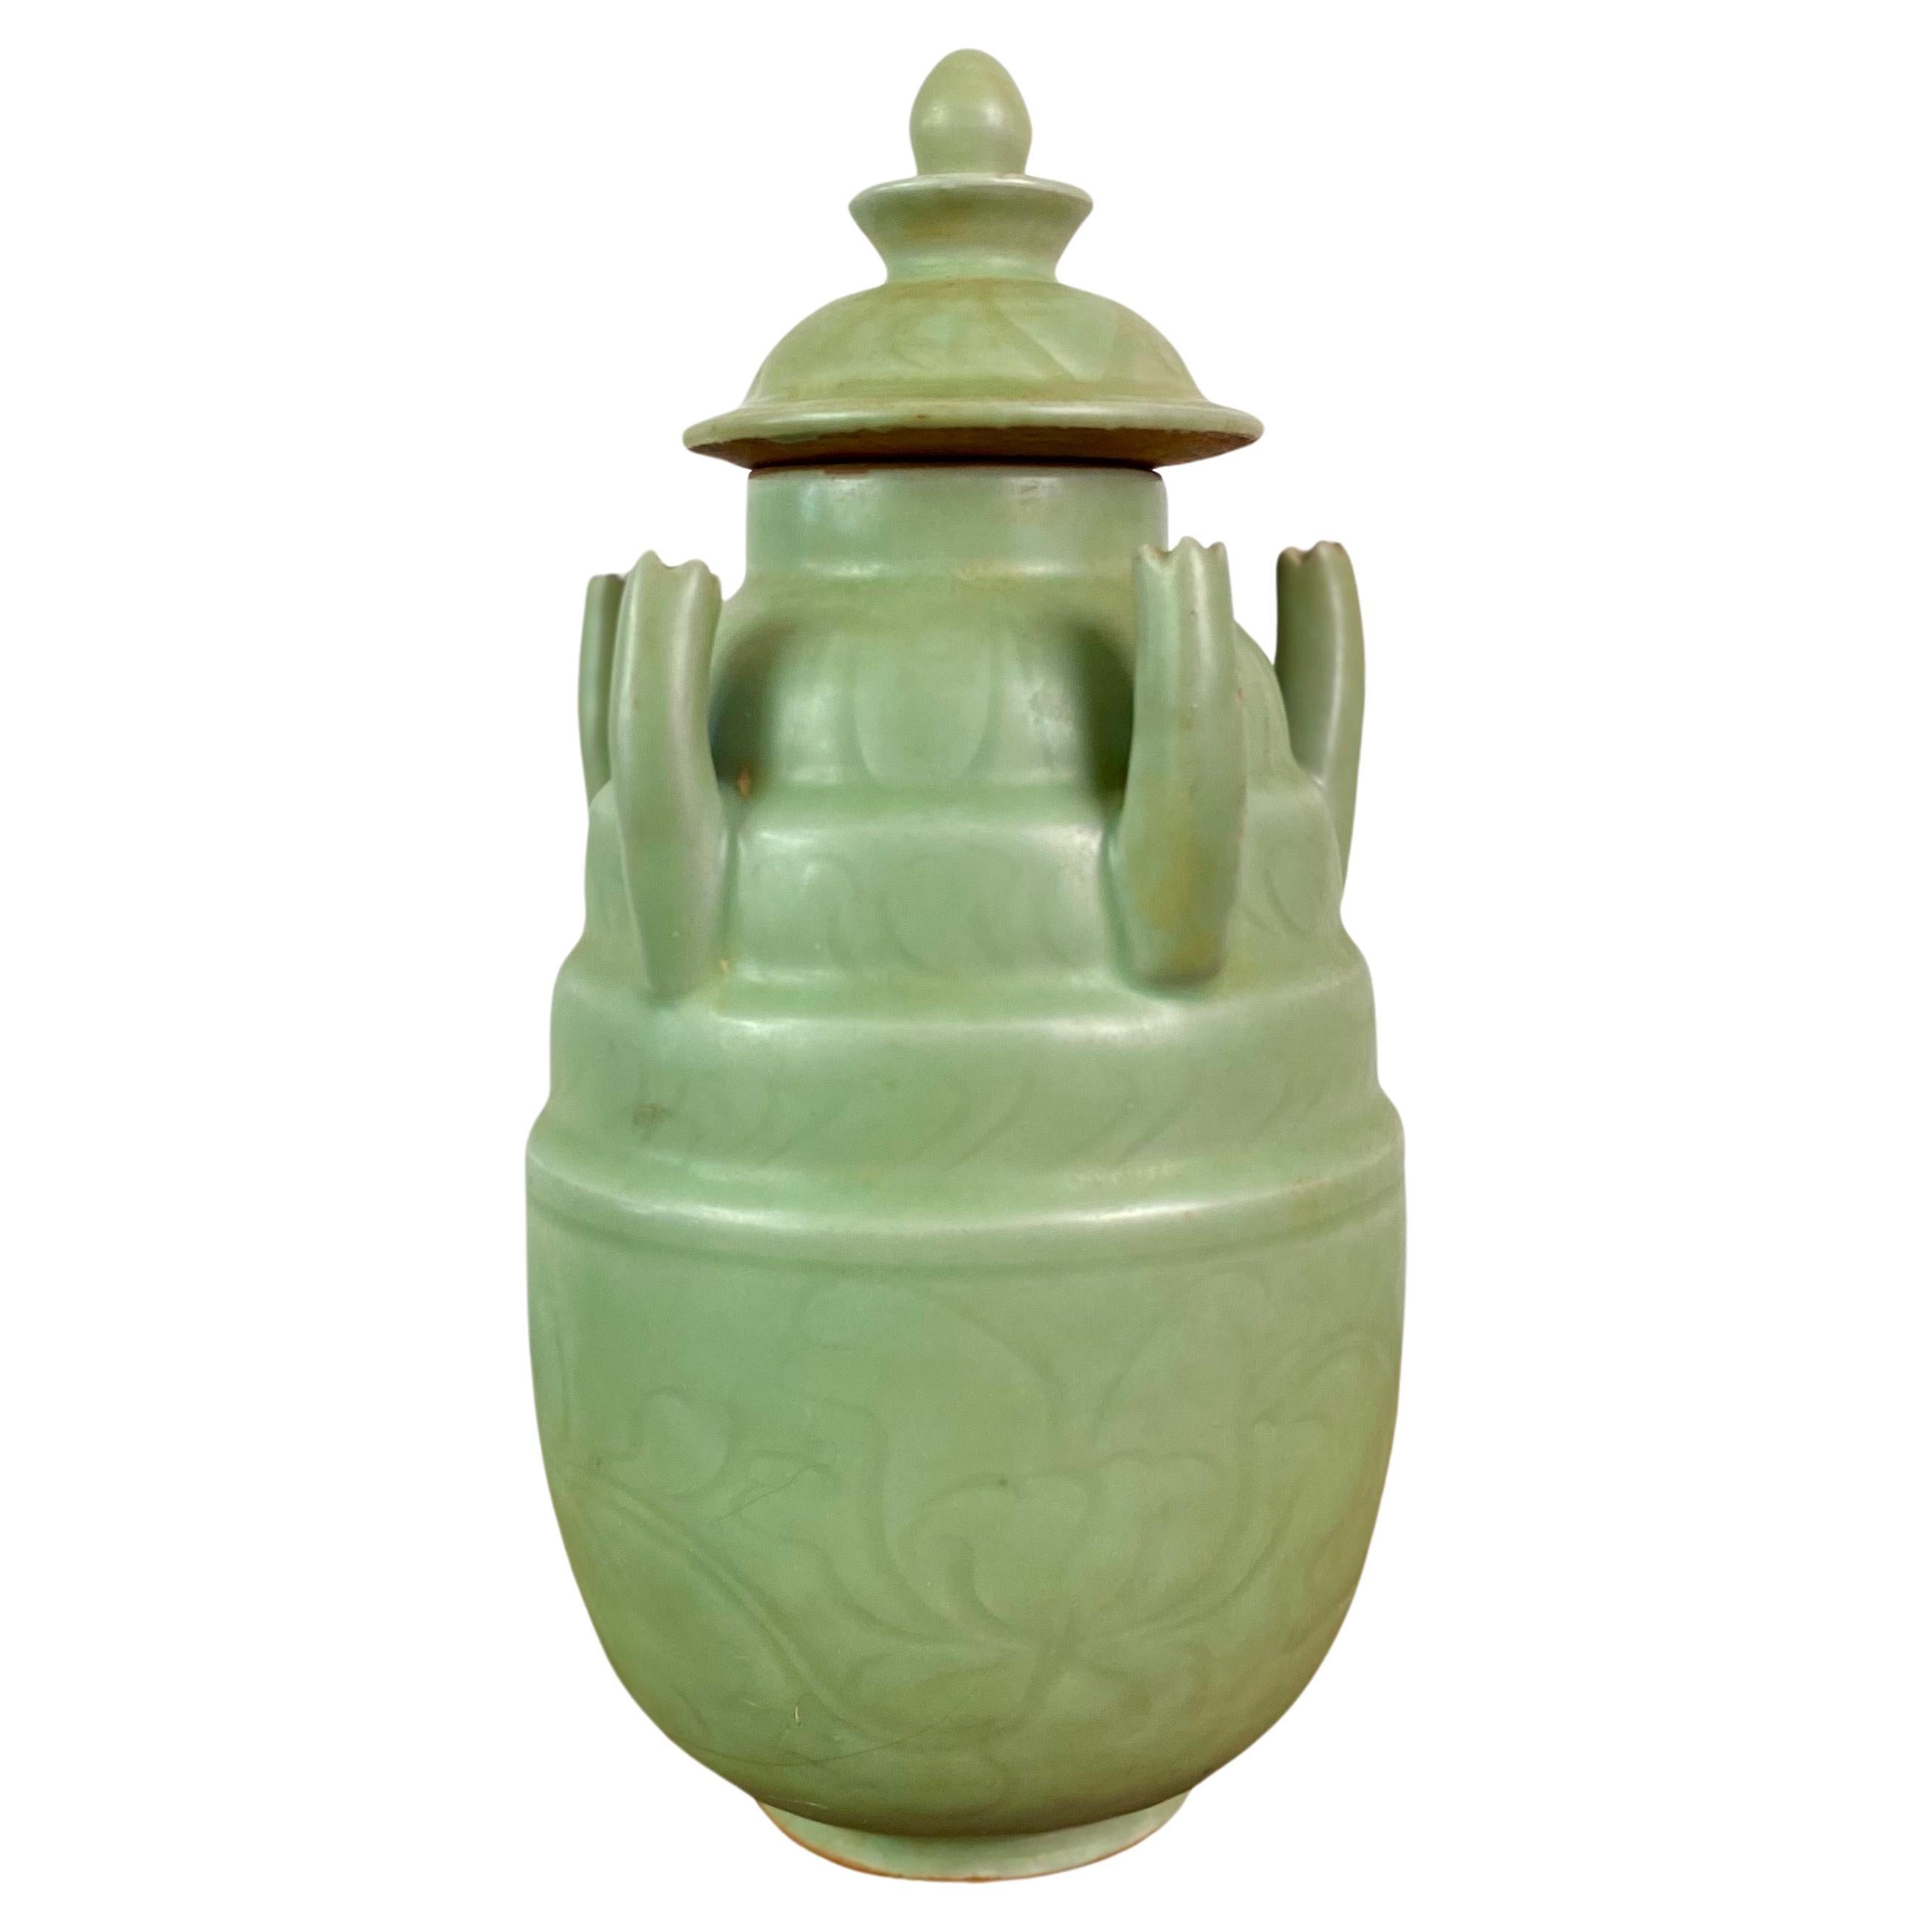 Longquan Celadon 5-tube Covered Vase - 18th or 19th Qing - Song style - Chine For Sale